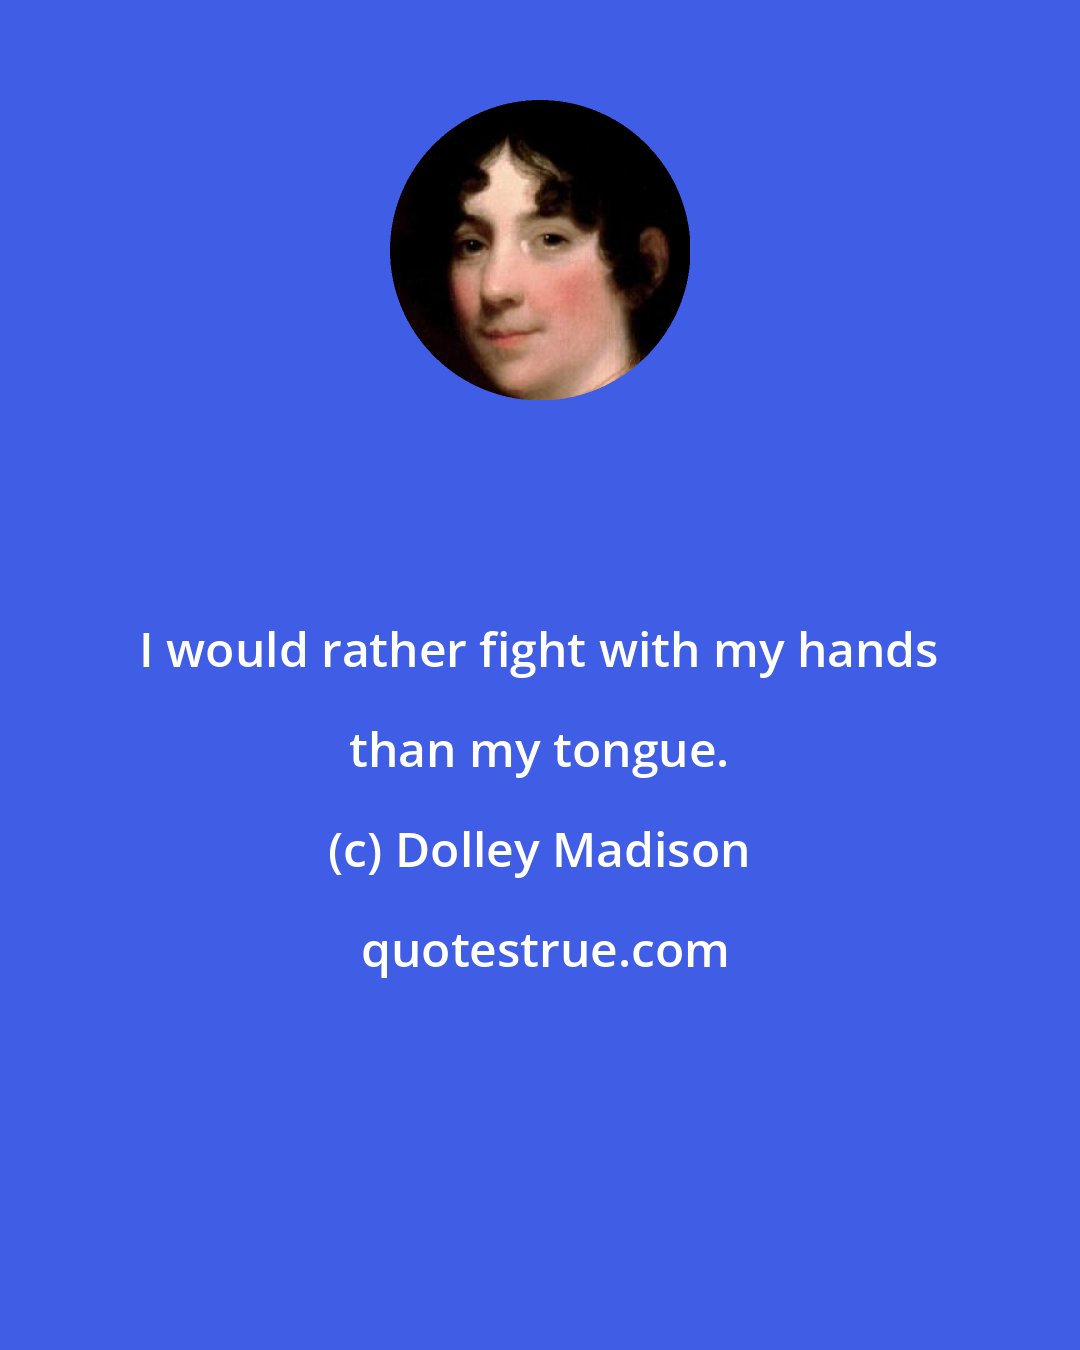 Dolley Madison: I would rather fight with my hands than my tongue.